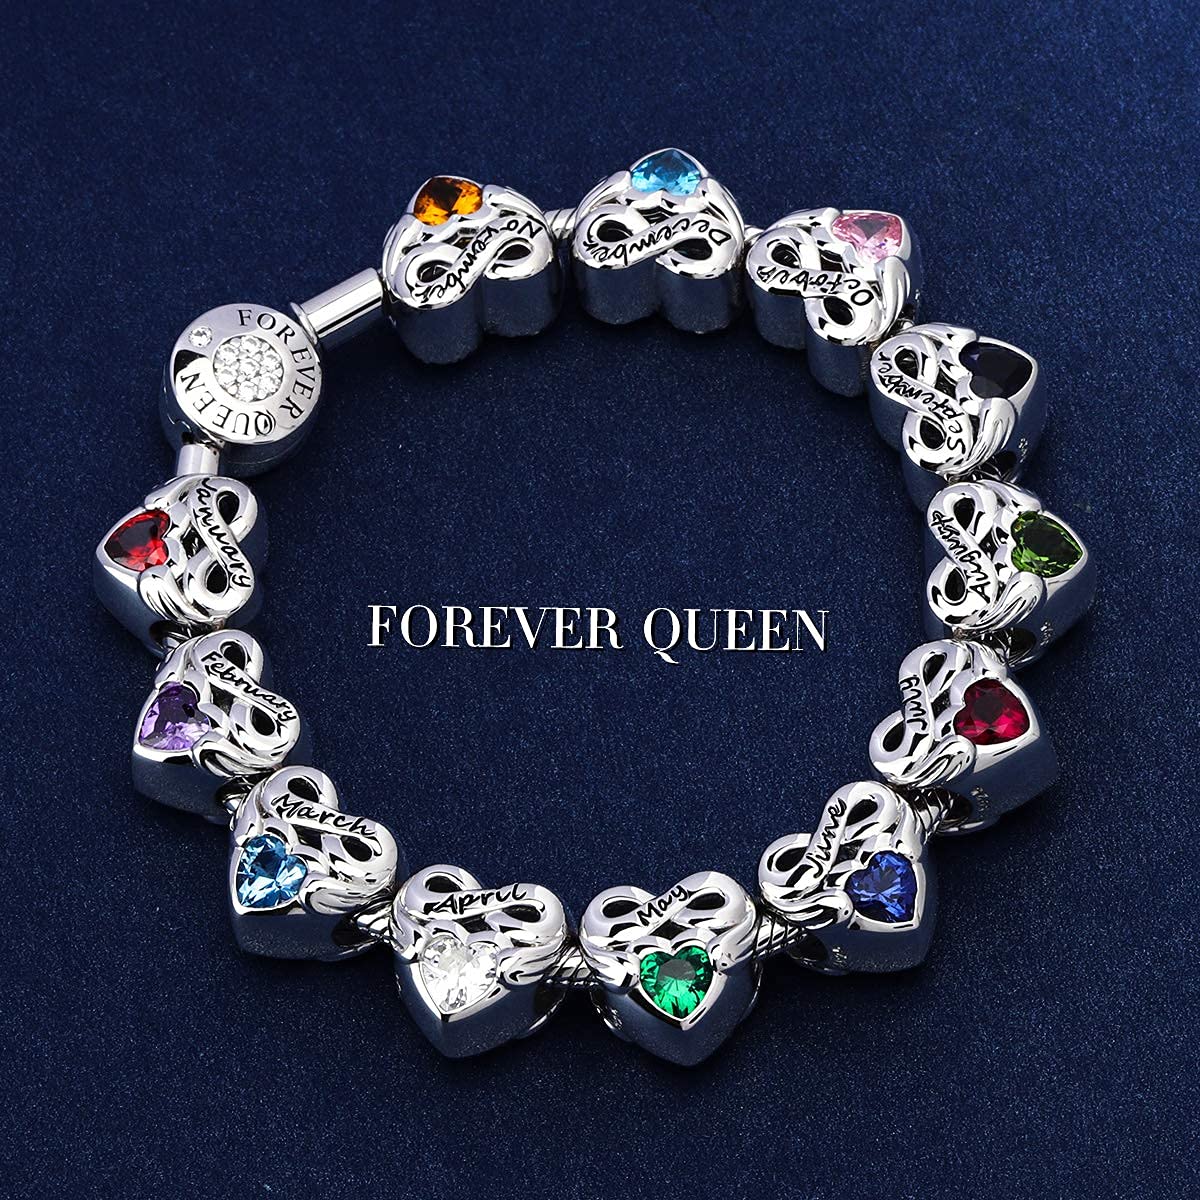 FOREVER QUEEN Birthstone Charms for Charms Bracelet- 925 Sterling Silver Love Heart Beads Infinite Love Charms, Happy Birthday Charms for Bracelet and Necklace